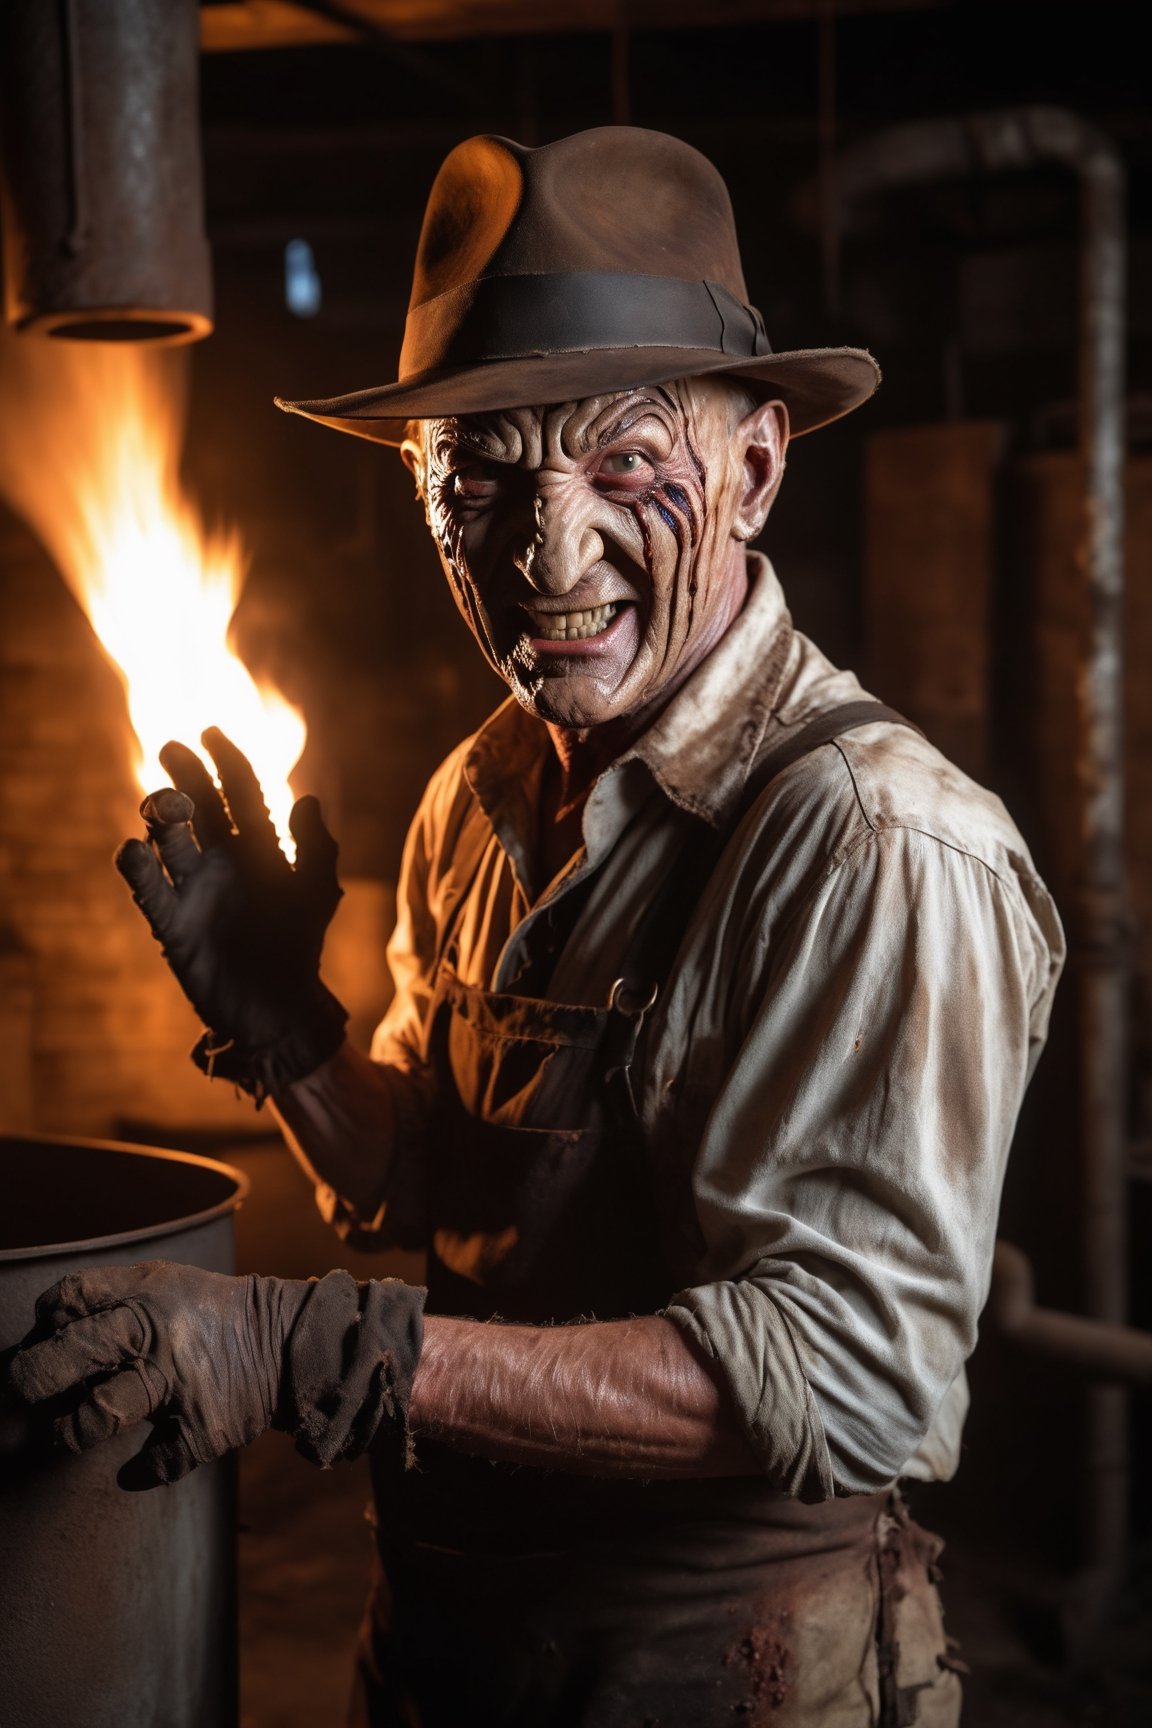 Freddy Krueger, fedora hat, facial portrait, evil smile, ragged shirt, wearing glove with long claws on right hand, inside old warehouse, dim light, big rusty iron oven, faucets leaking, fire, from behind 